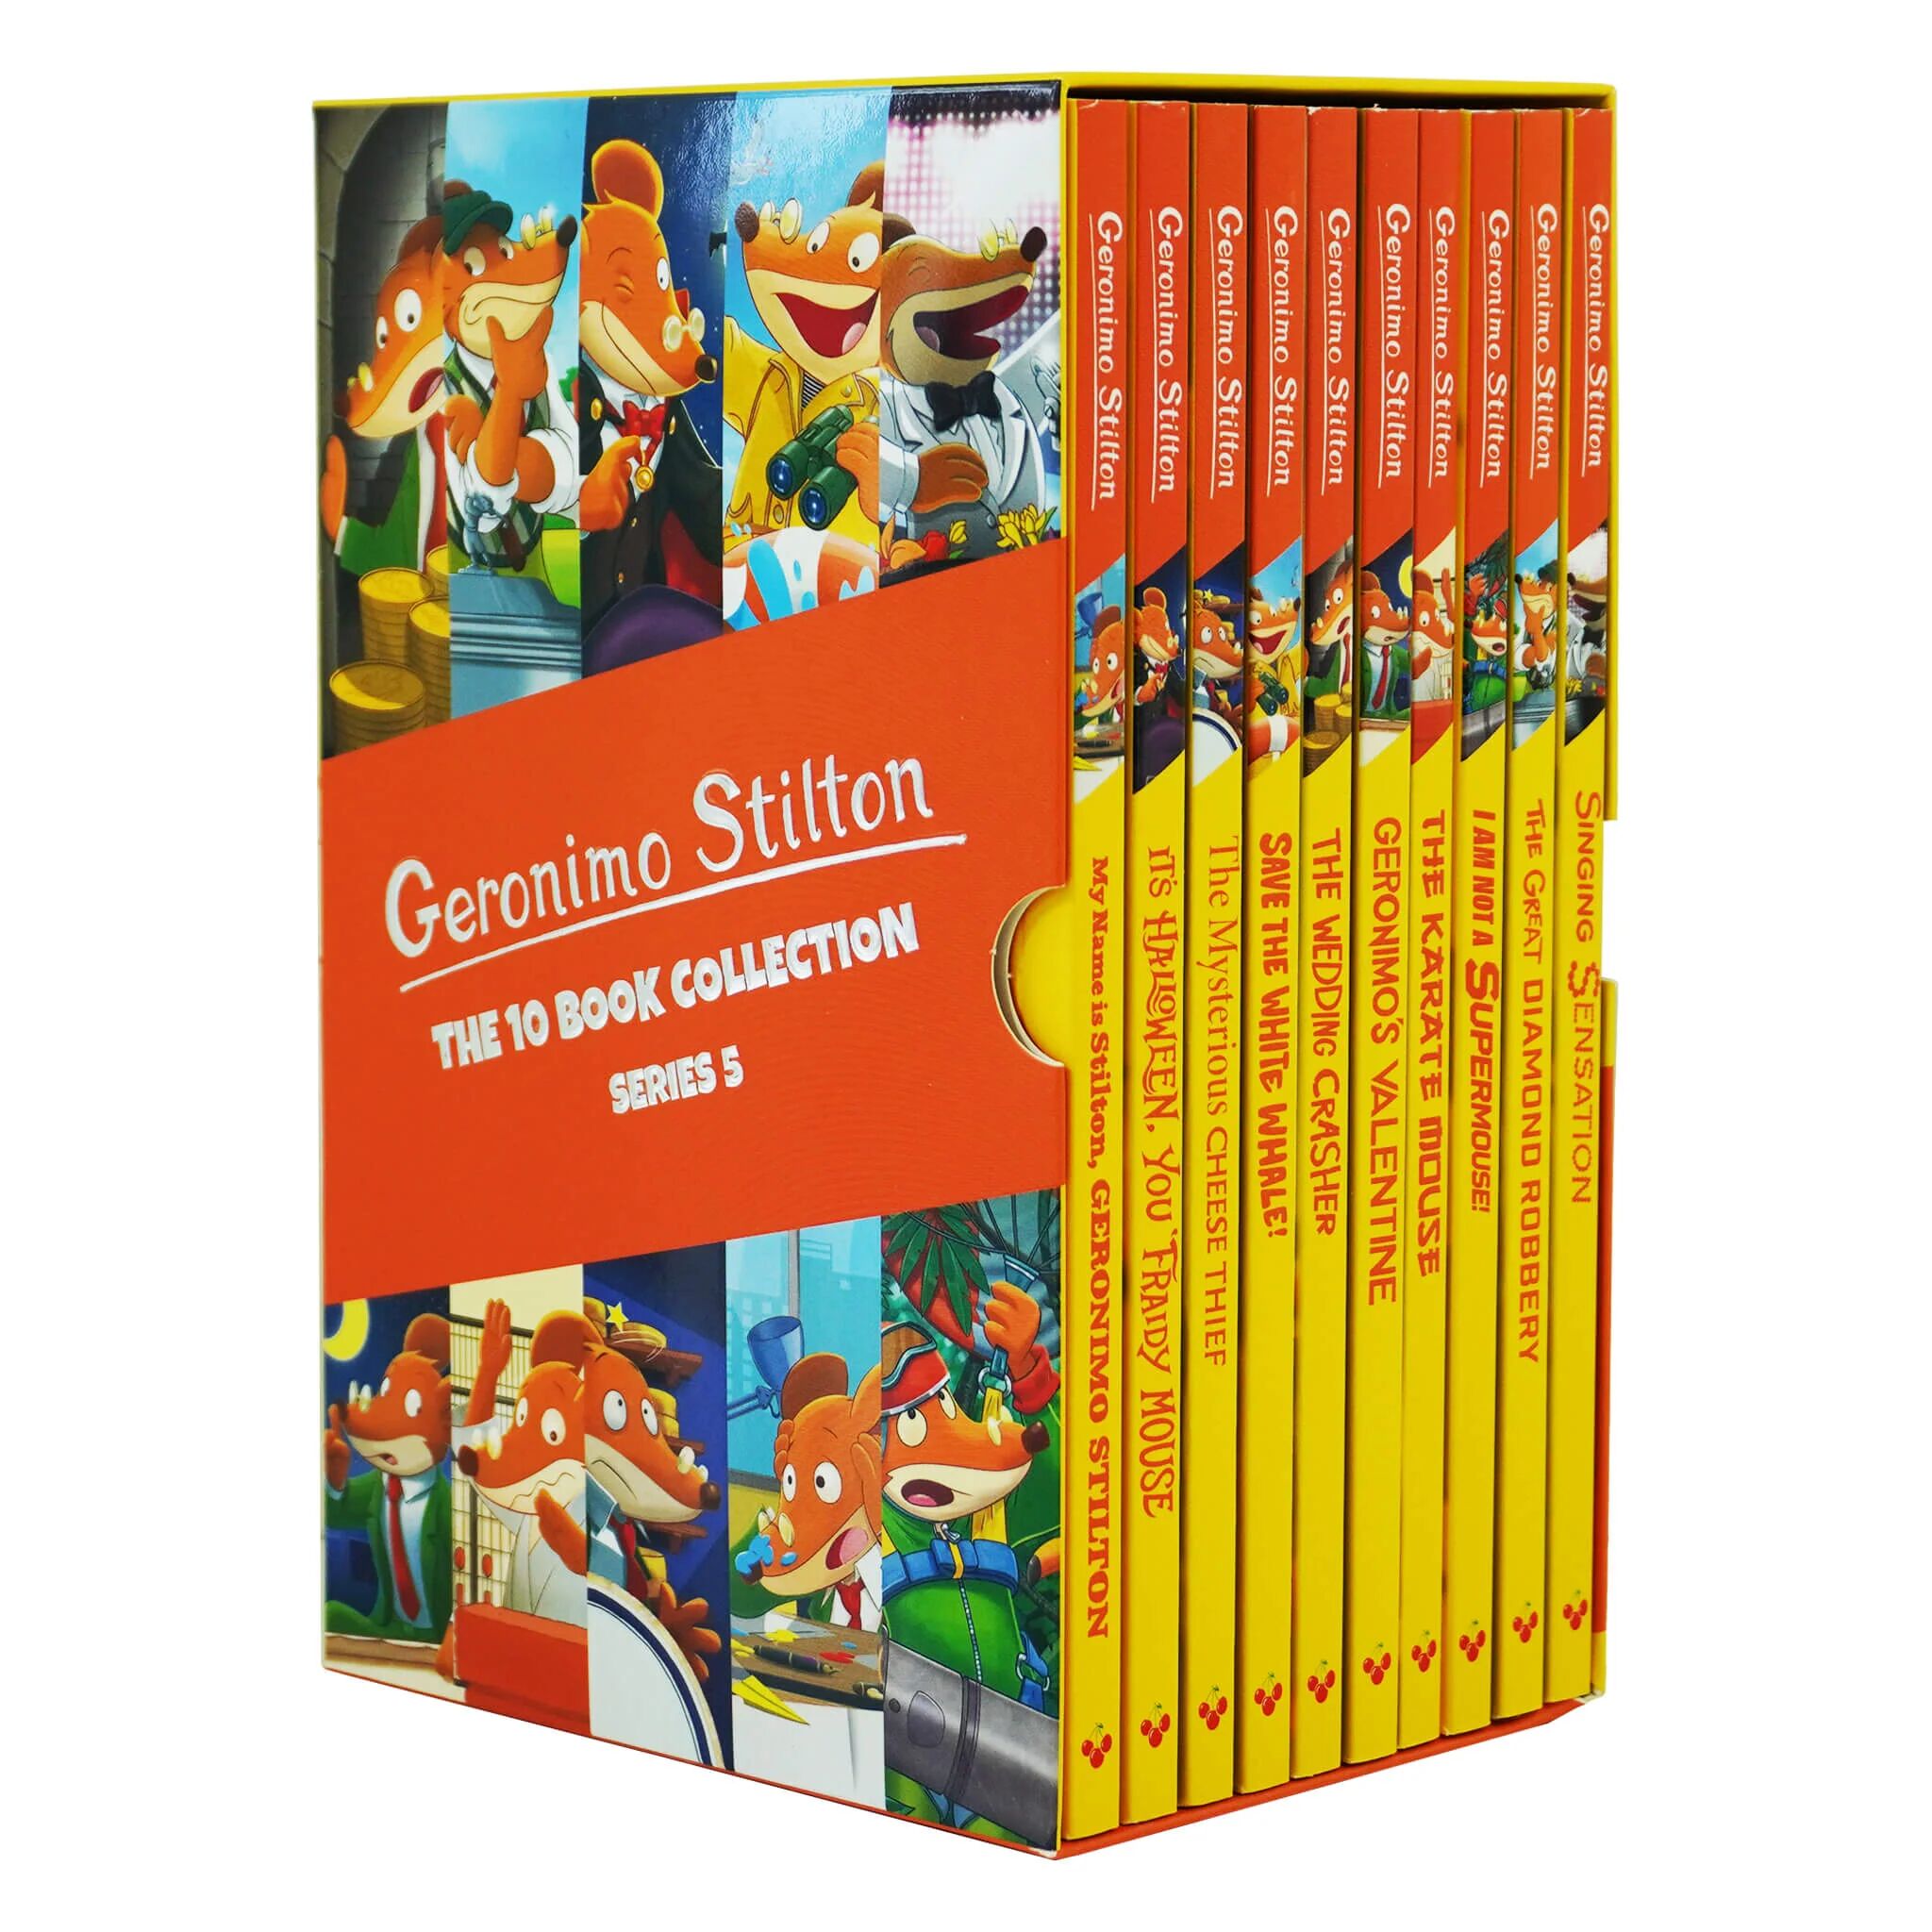 Geronimo Stilton The 10 Book Collection (Series 5) Box Set - Ages 5-7 - Paperback Sweet Cherry Publishing